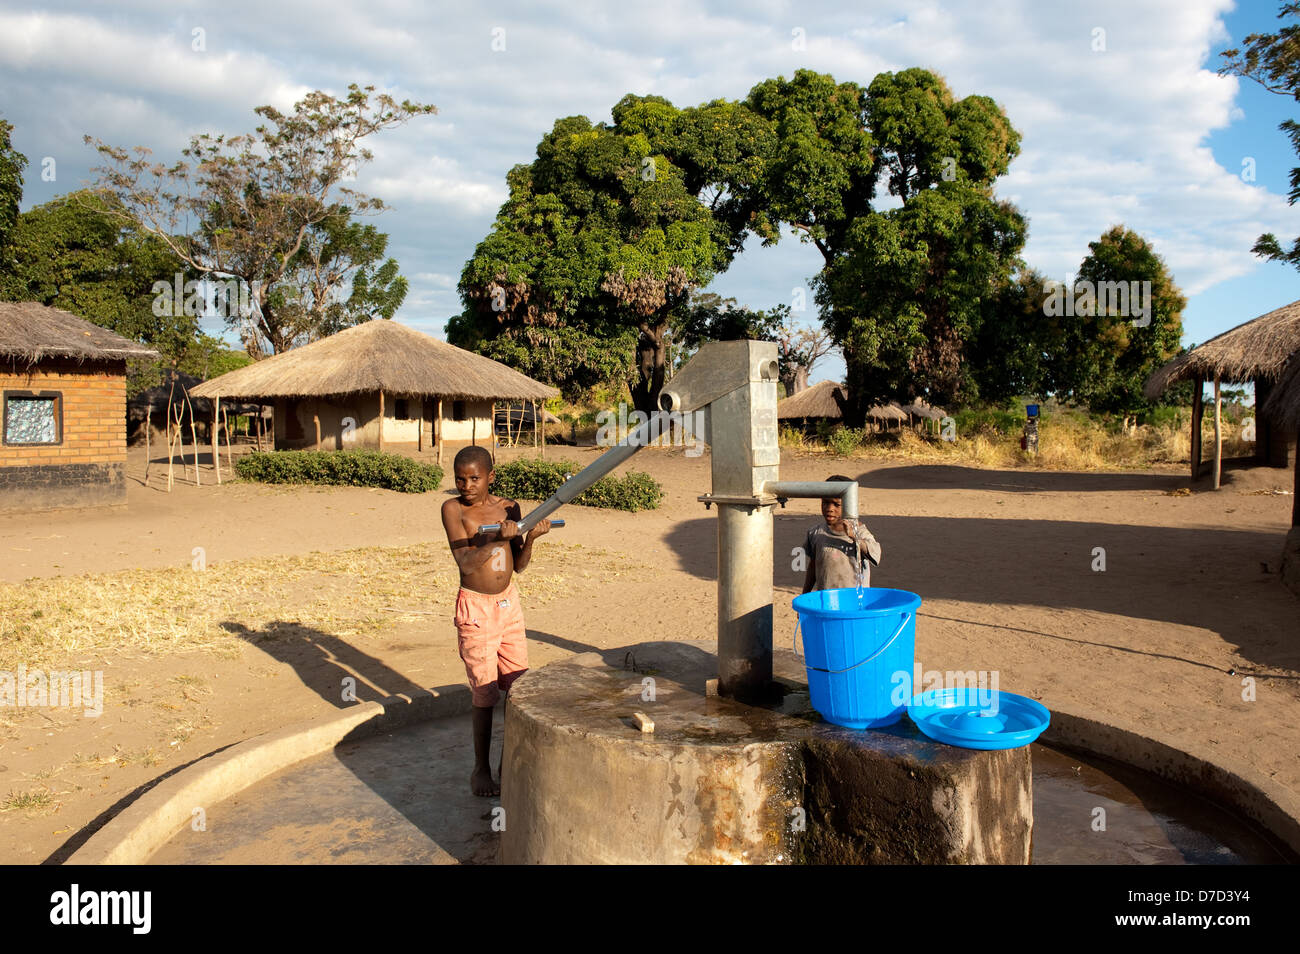 Boy pumping water from a well, lake Niassa, Mozambique Stock Photo